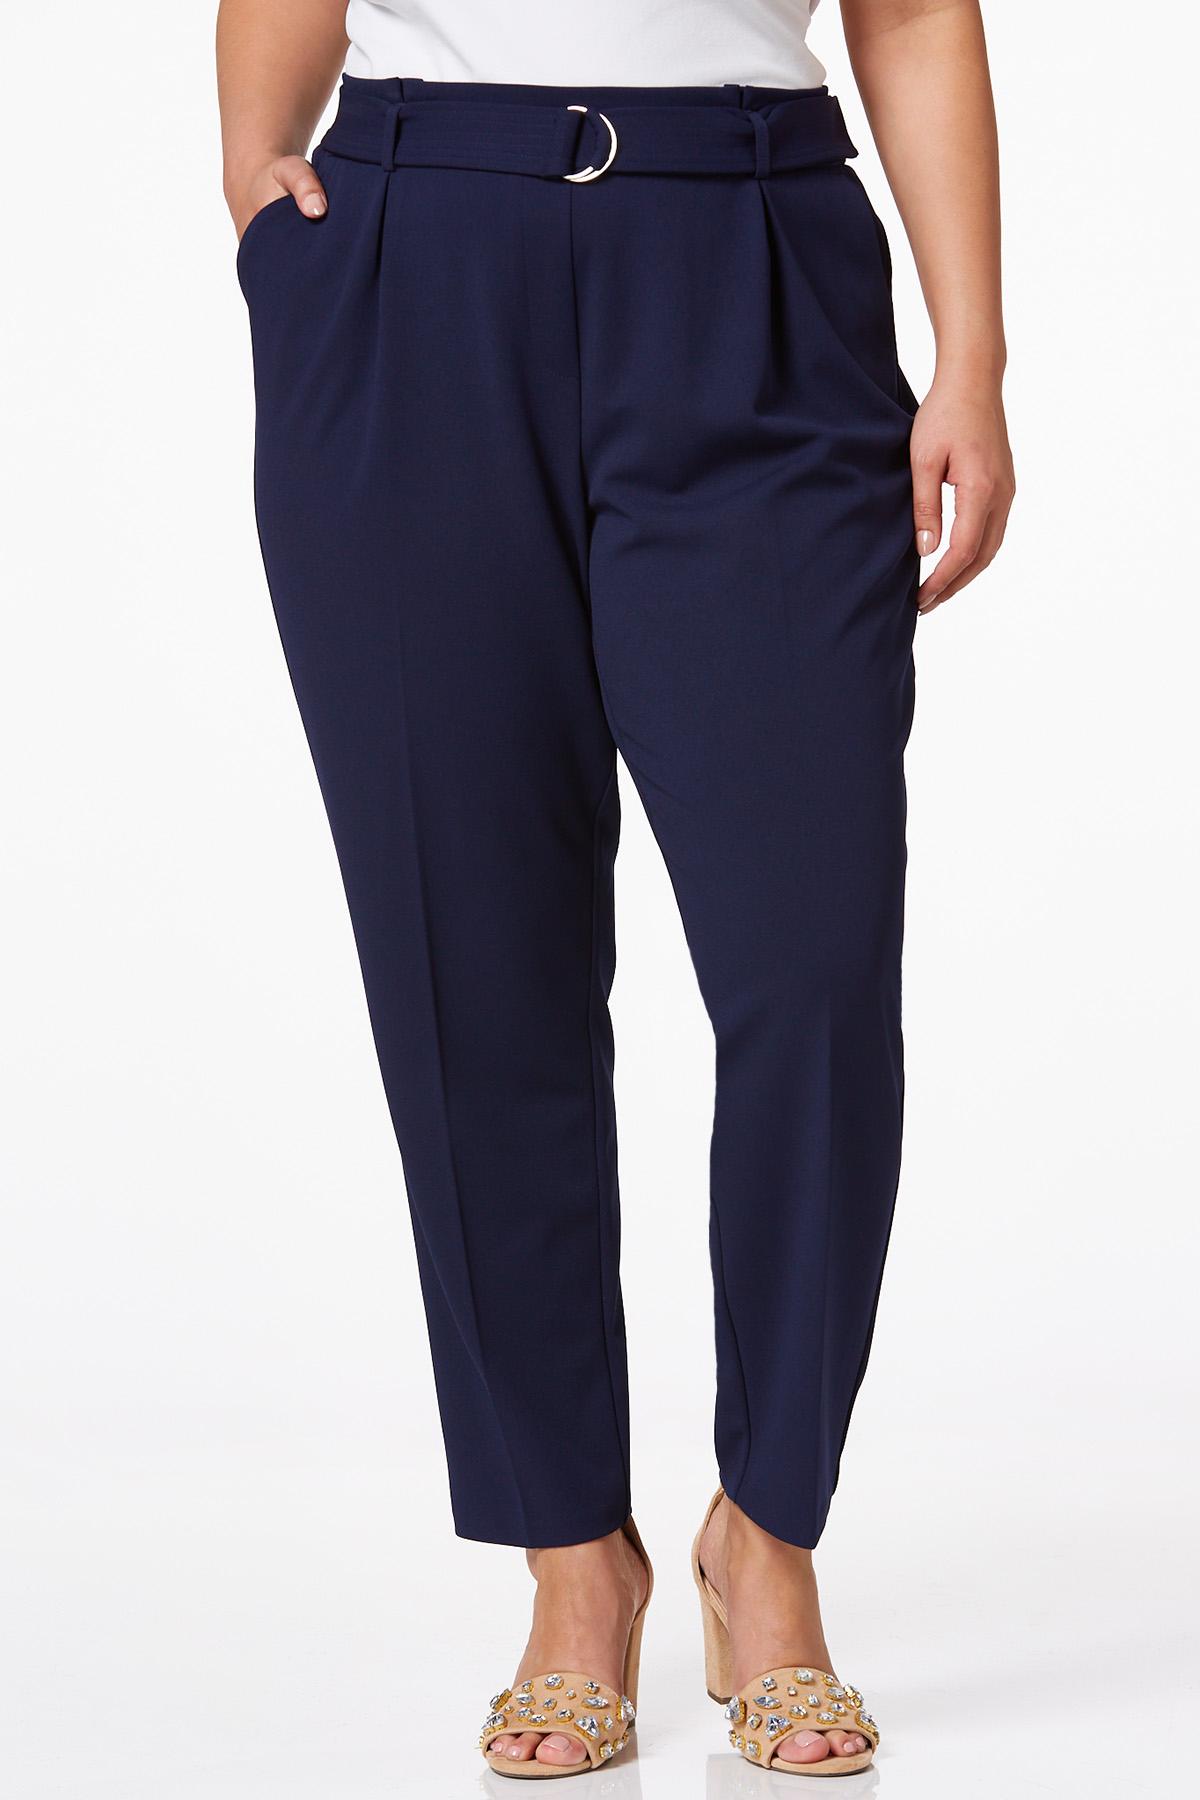 Cato Fashions  Cato Plus Size Navy Slim Ankle Pants